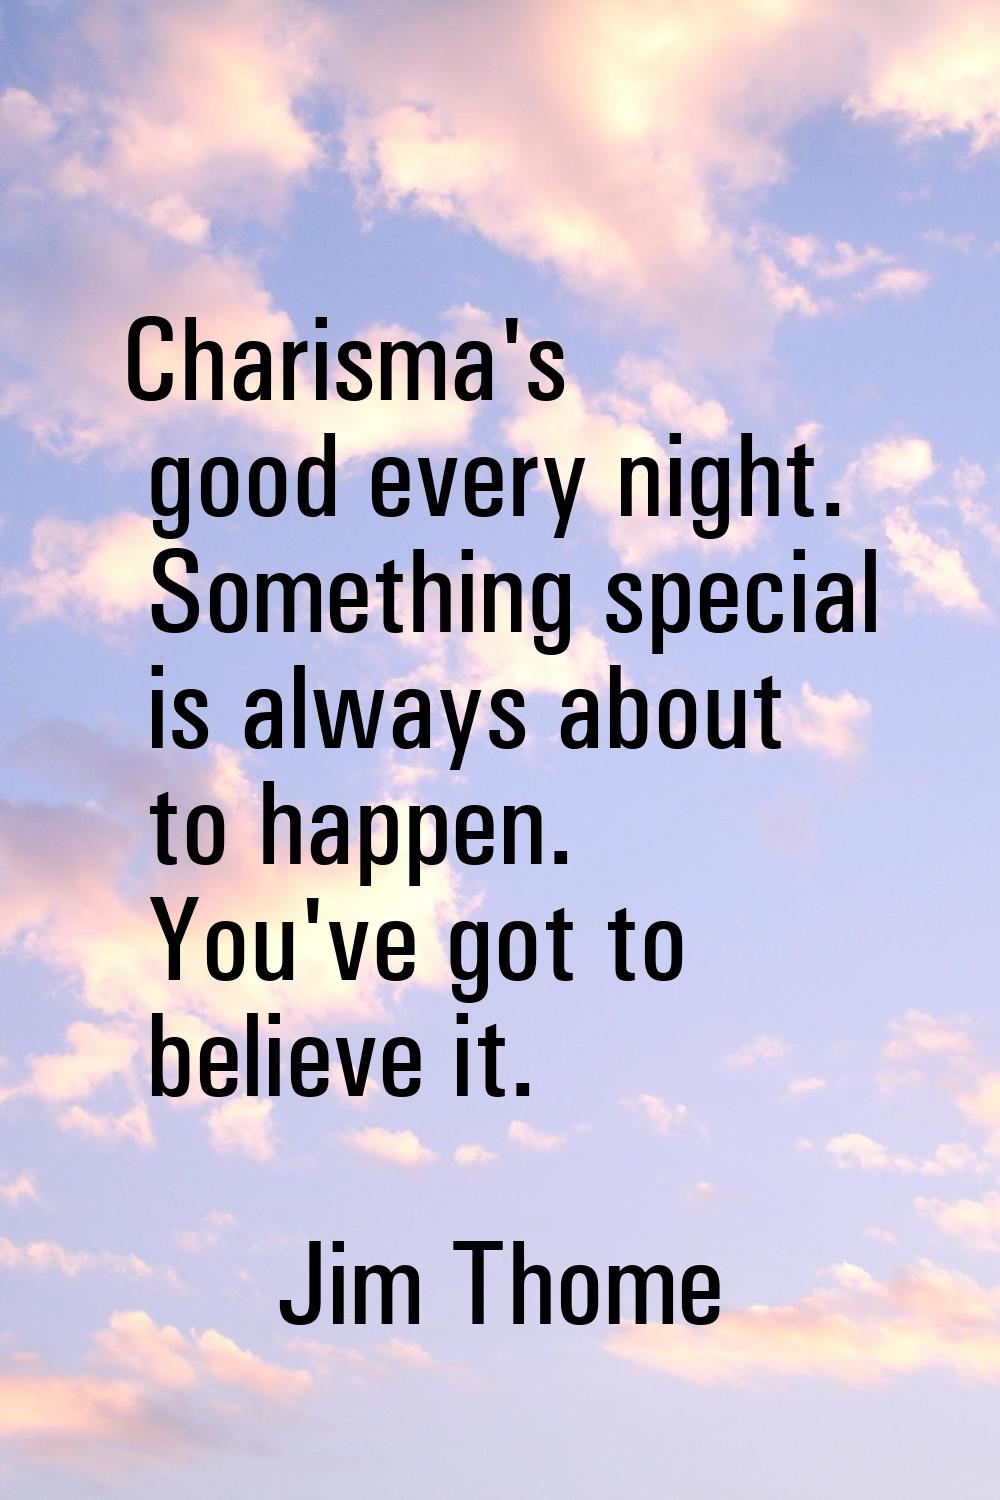 Charisma's good every night. Something special is always about to happen. You've got to believe it.